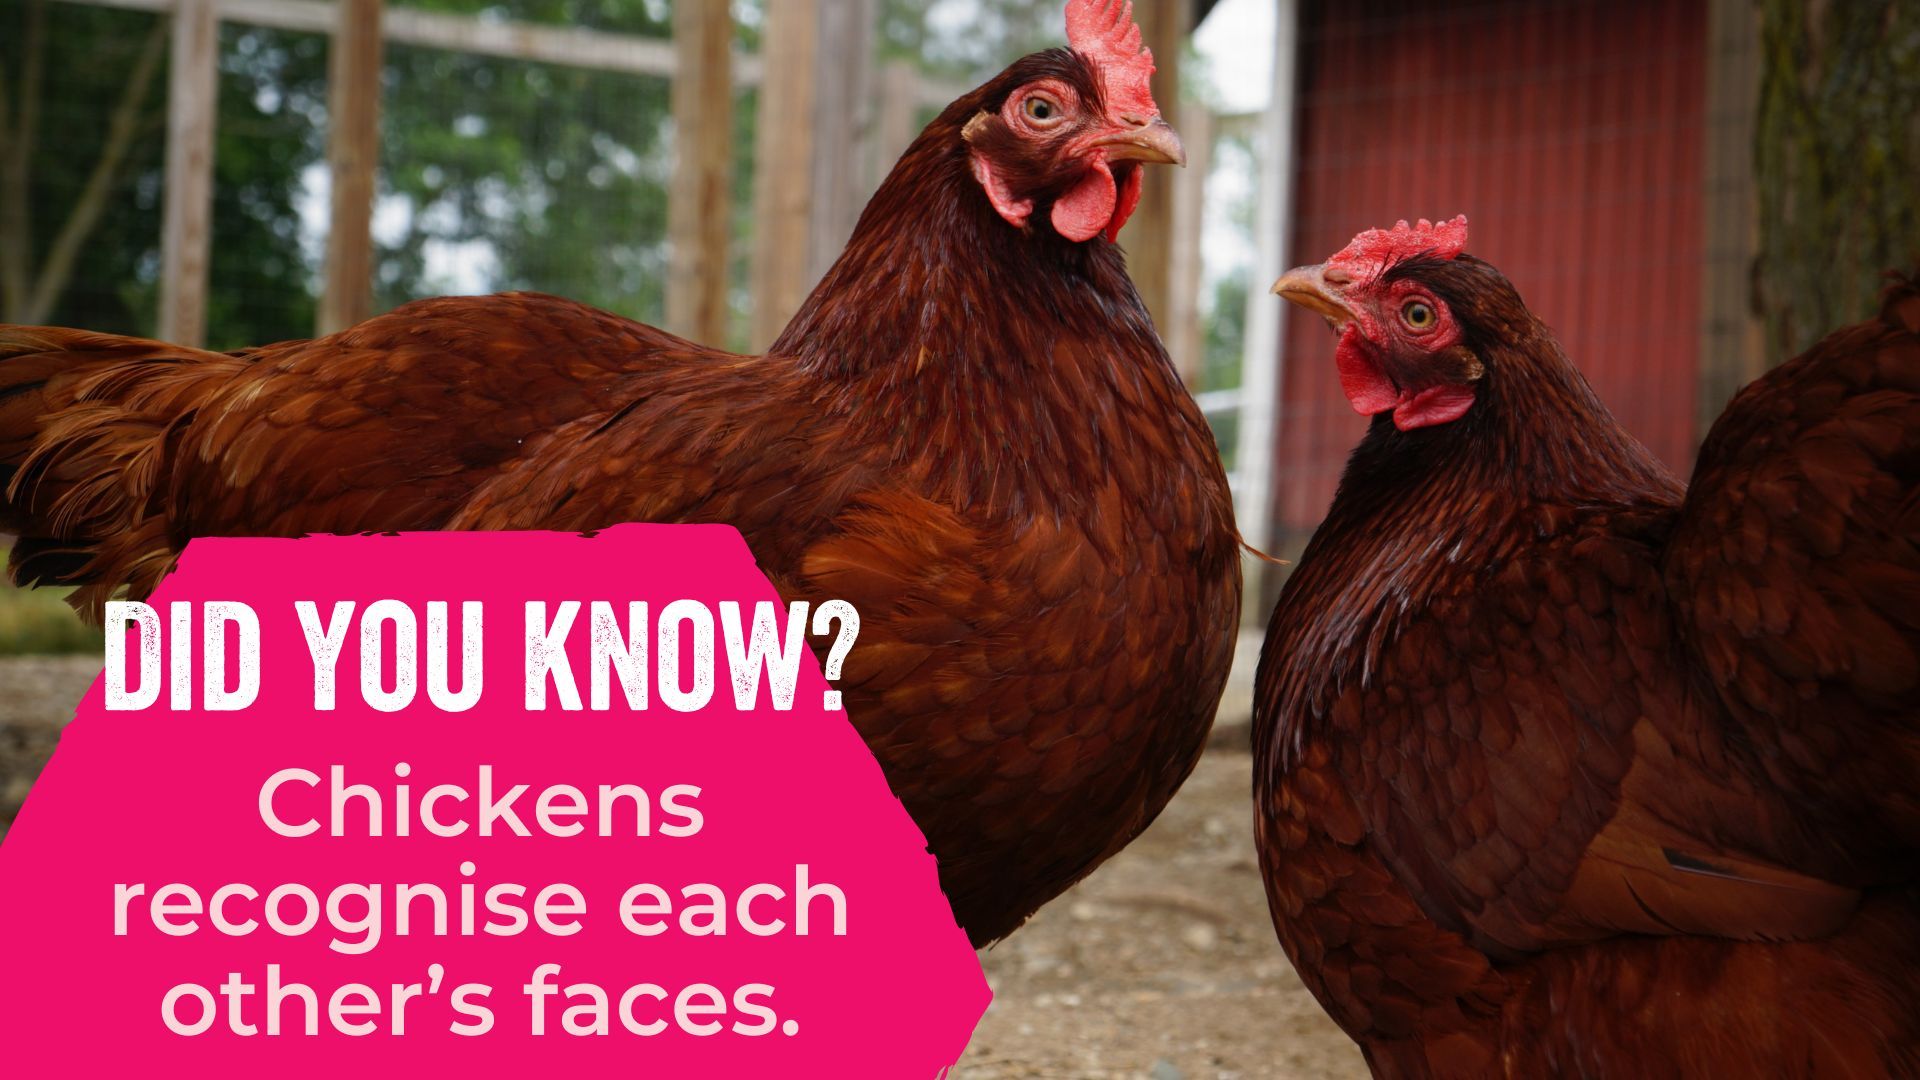 Chickens recognise each other’s faces.